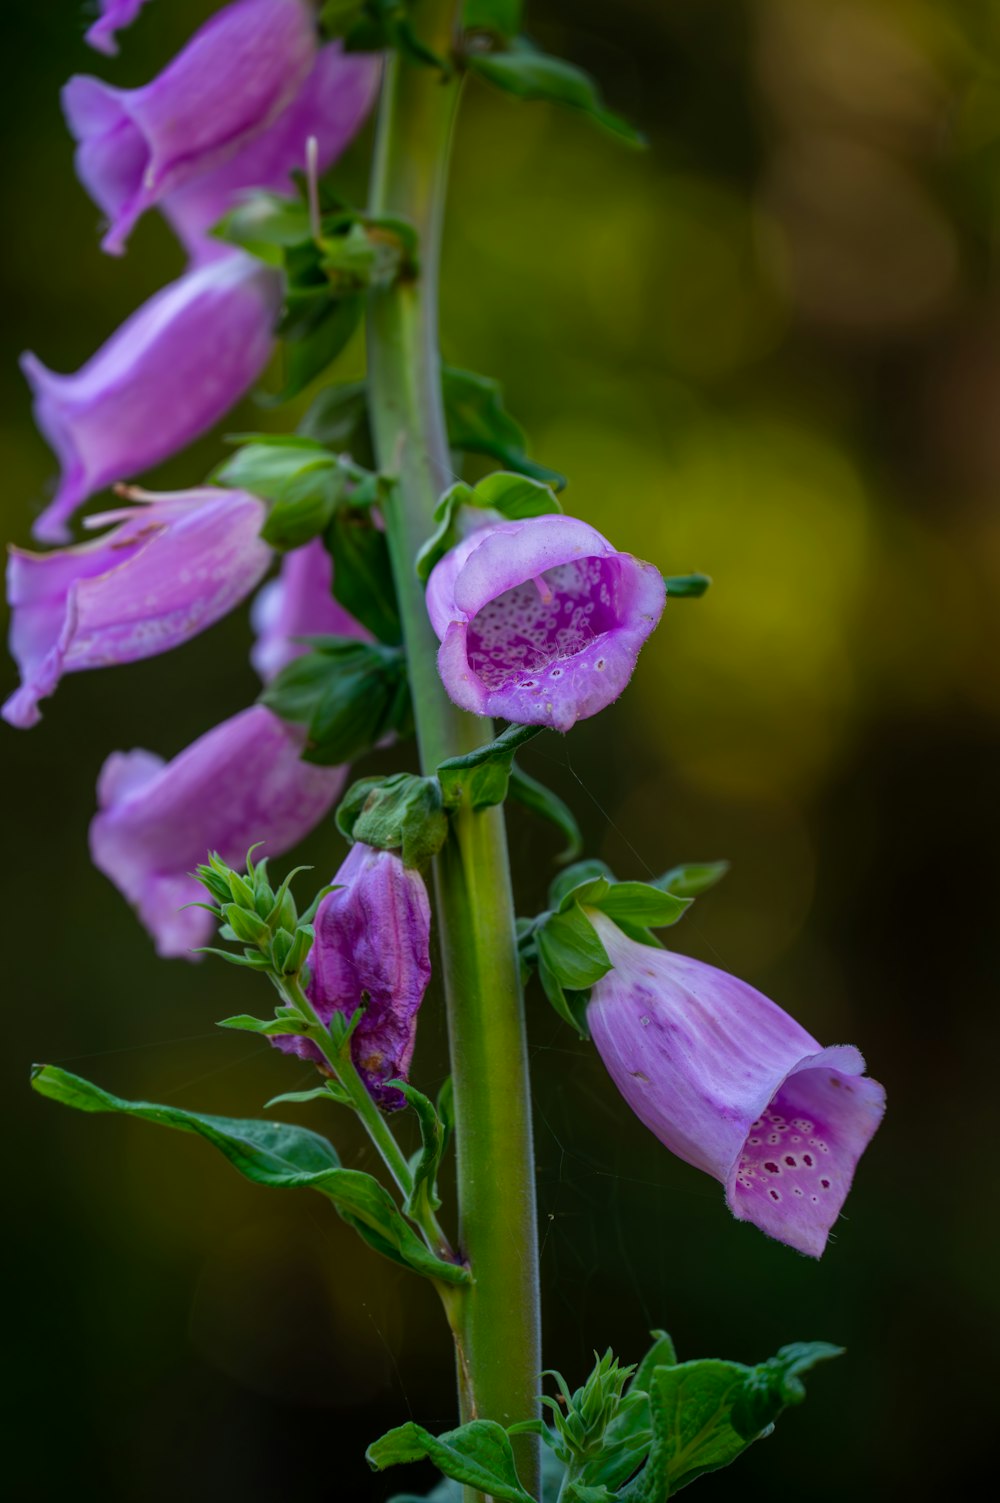 a close up of a purple flower on a stem